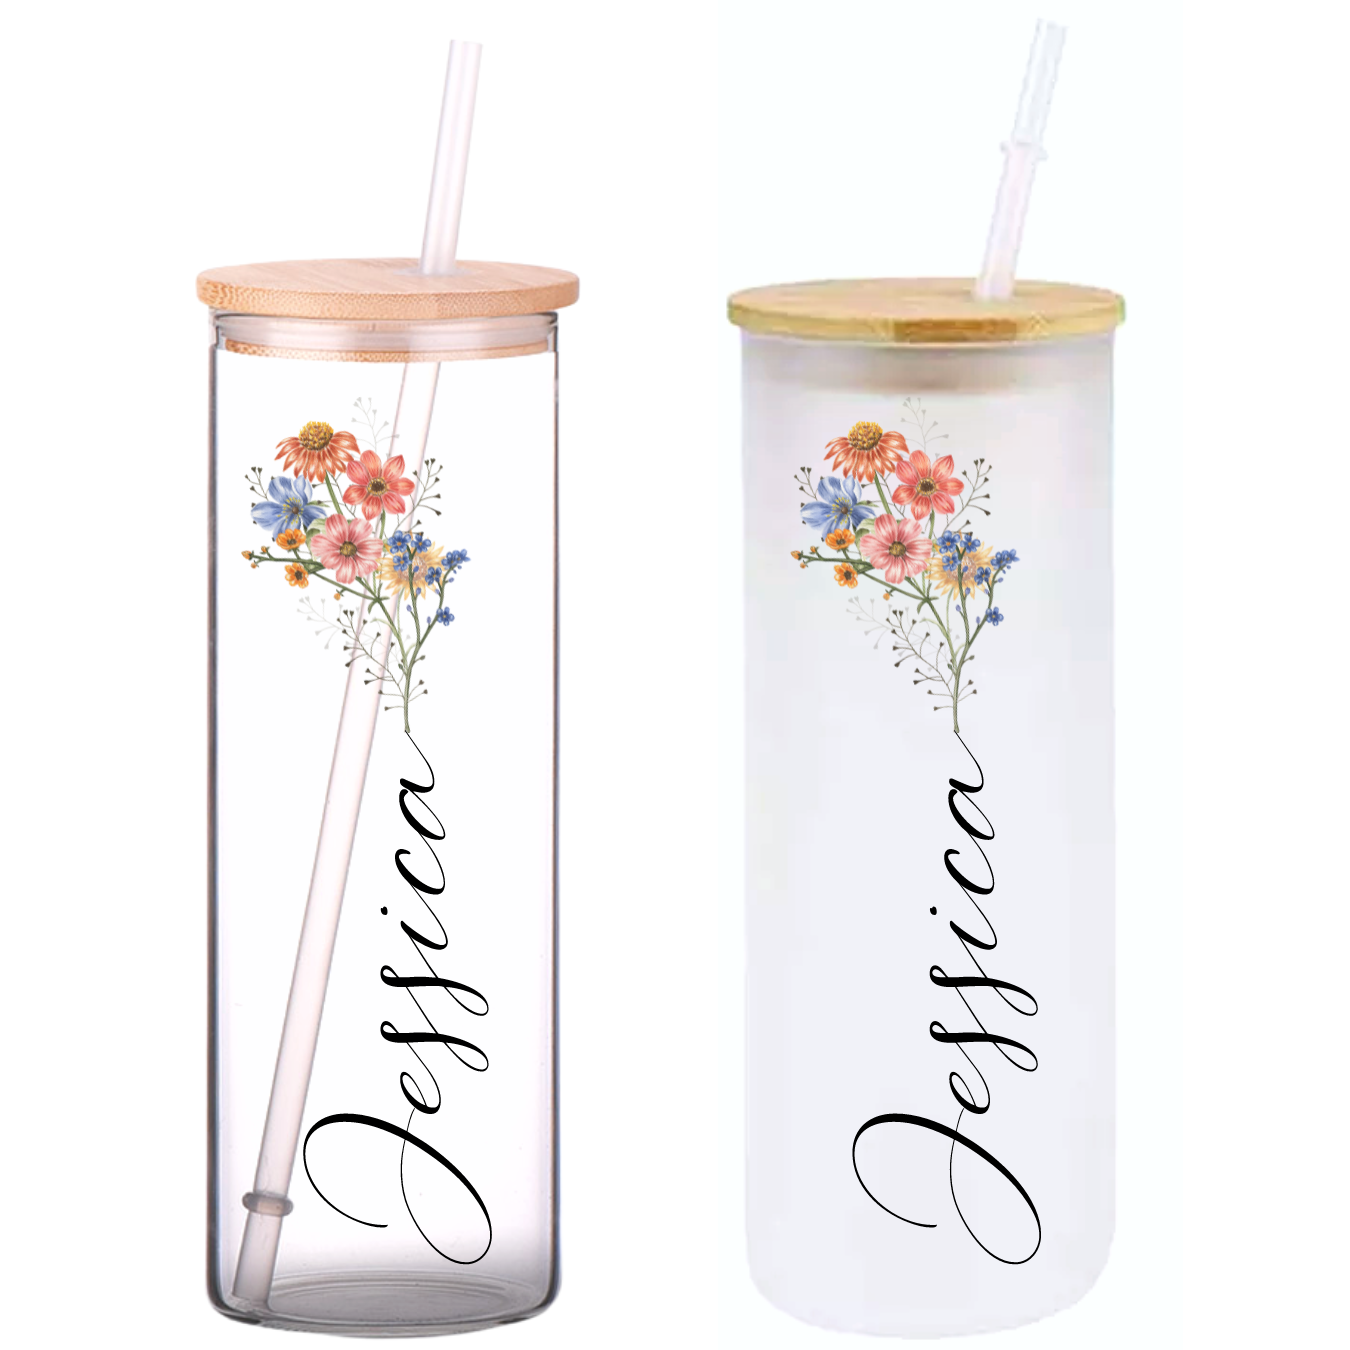 Humming Bird Sunset 16oz Glass Tumbler with Bamboo Lid & Straw for